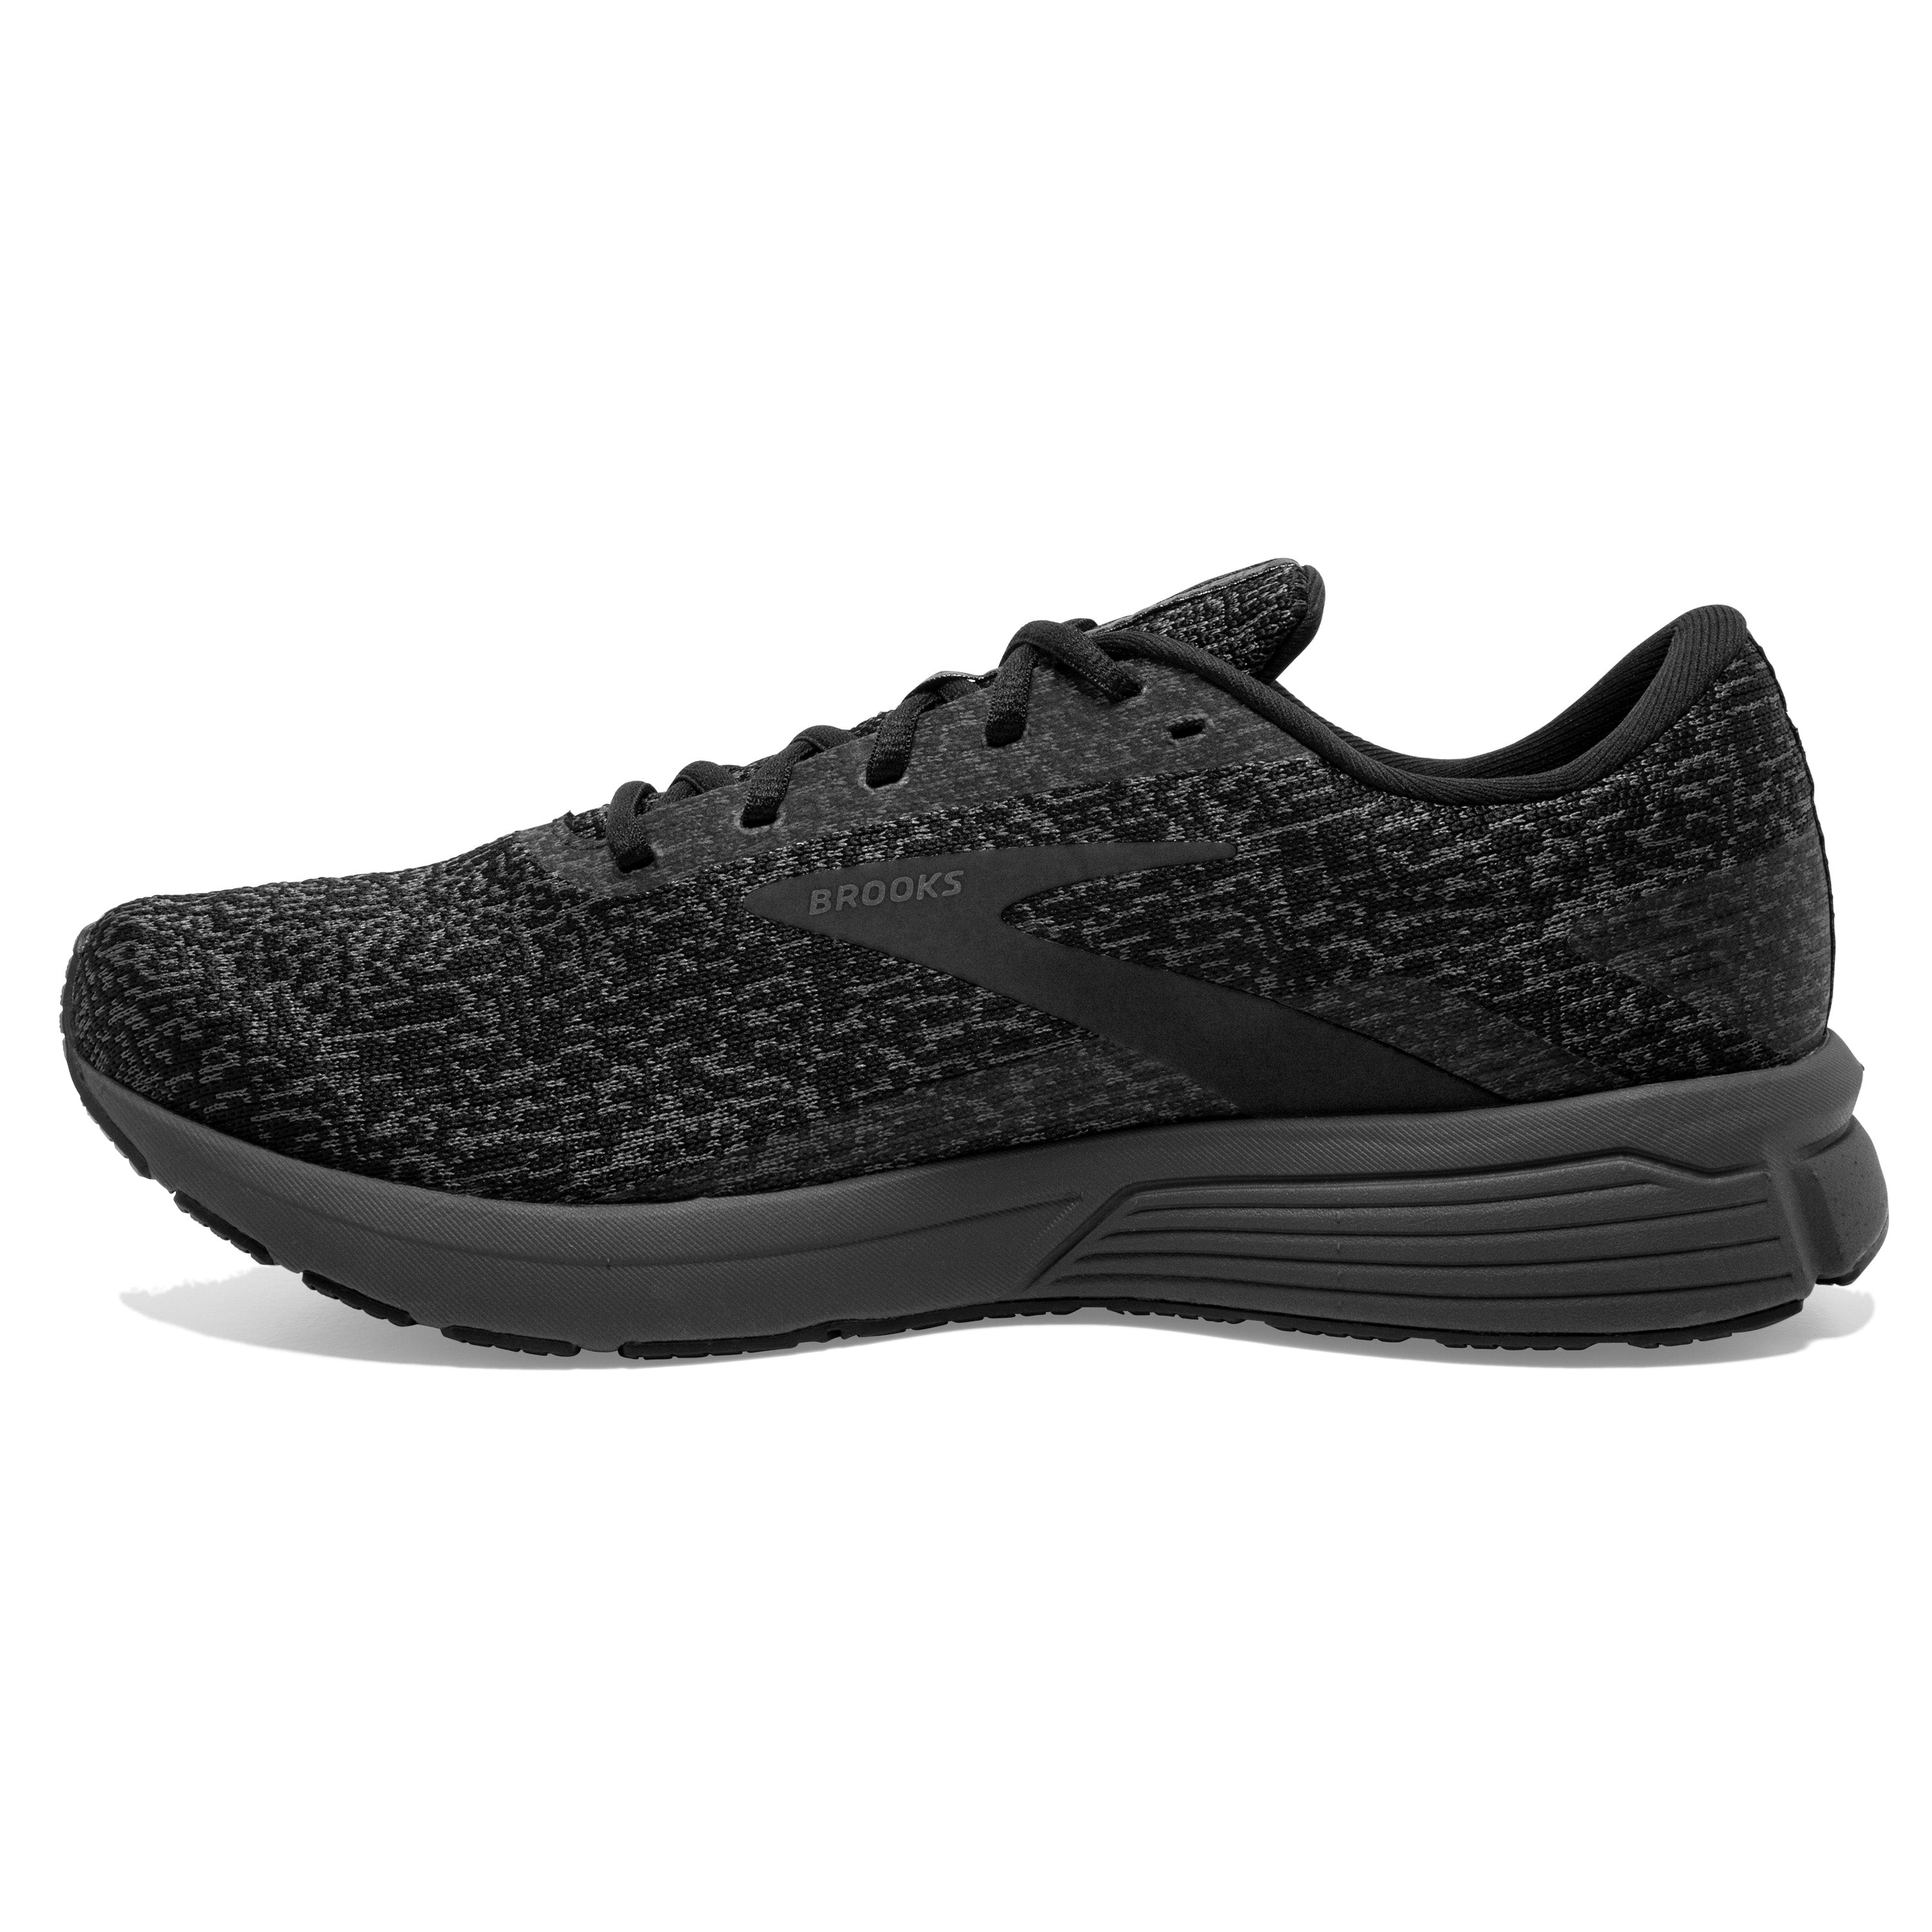 Signal 3 Men's road-running shoes